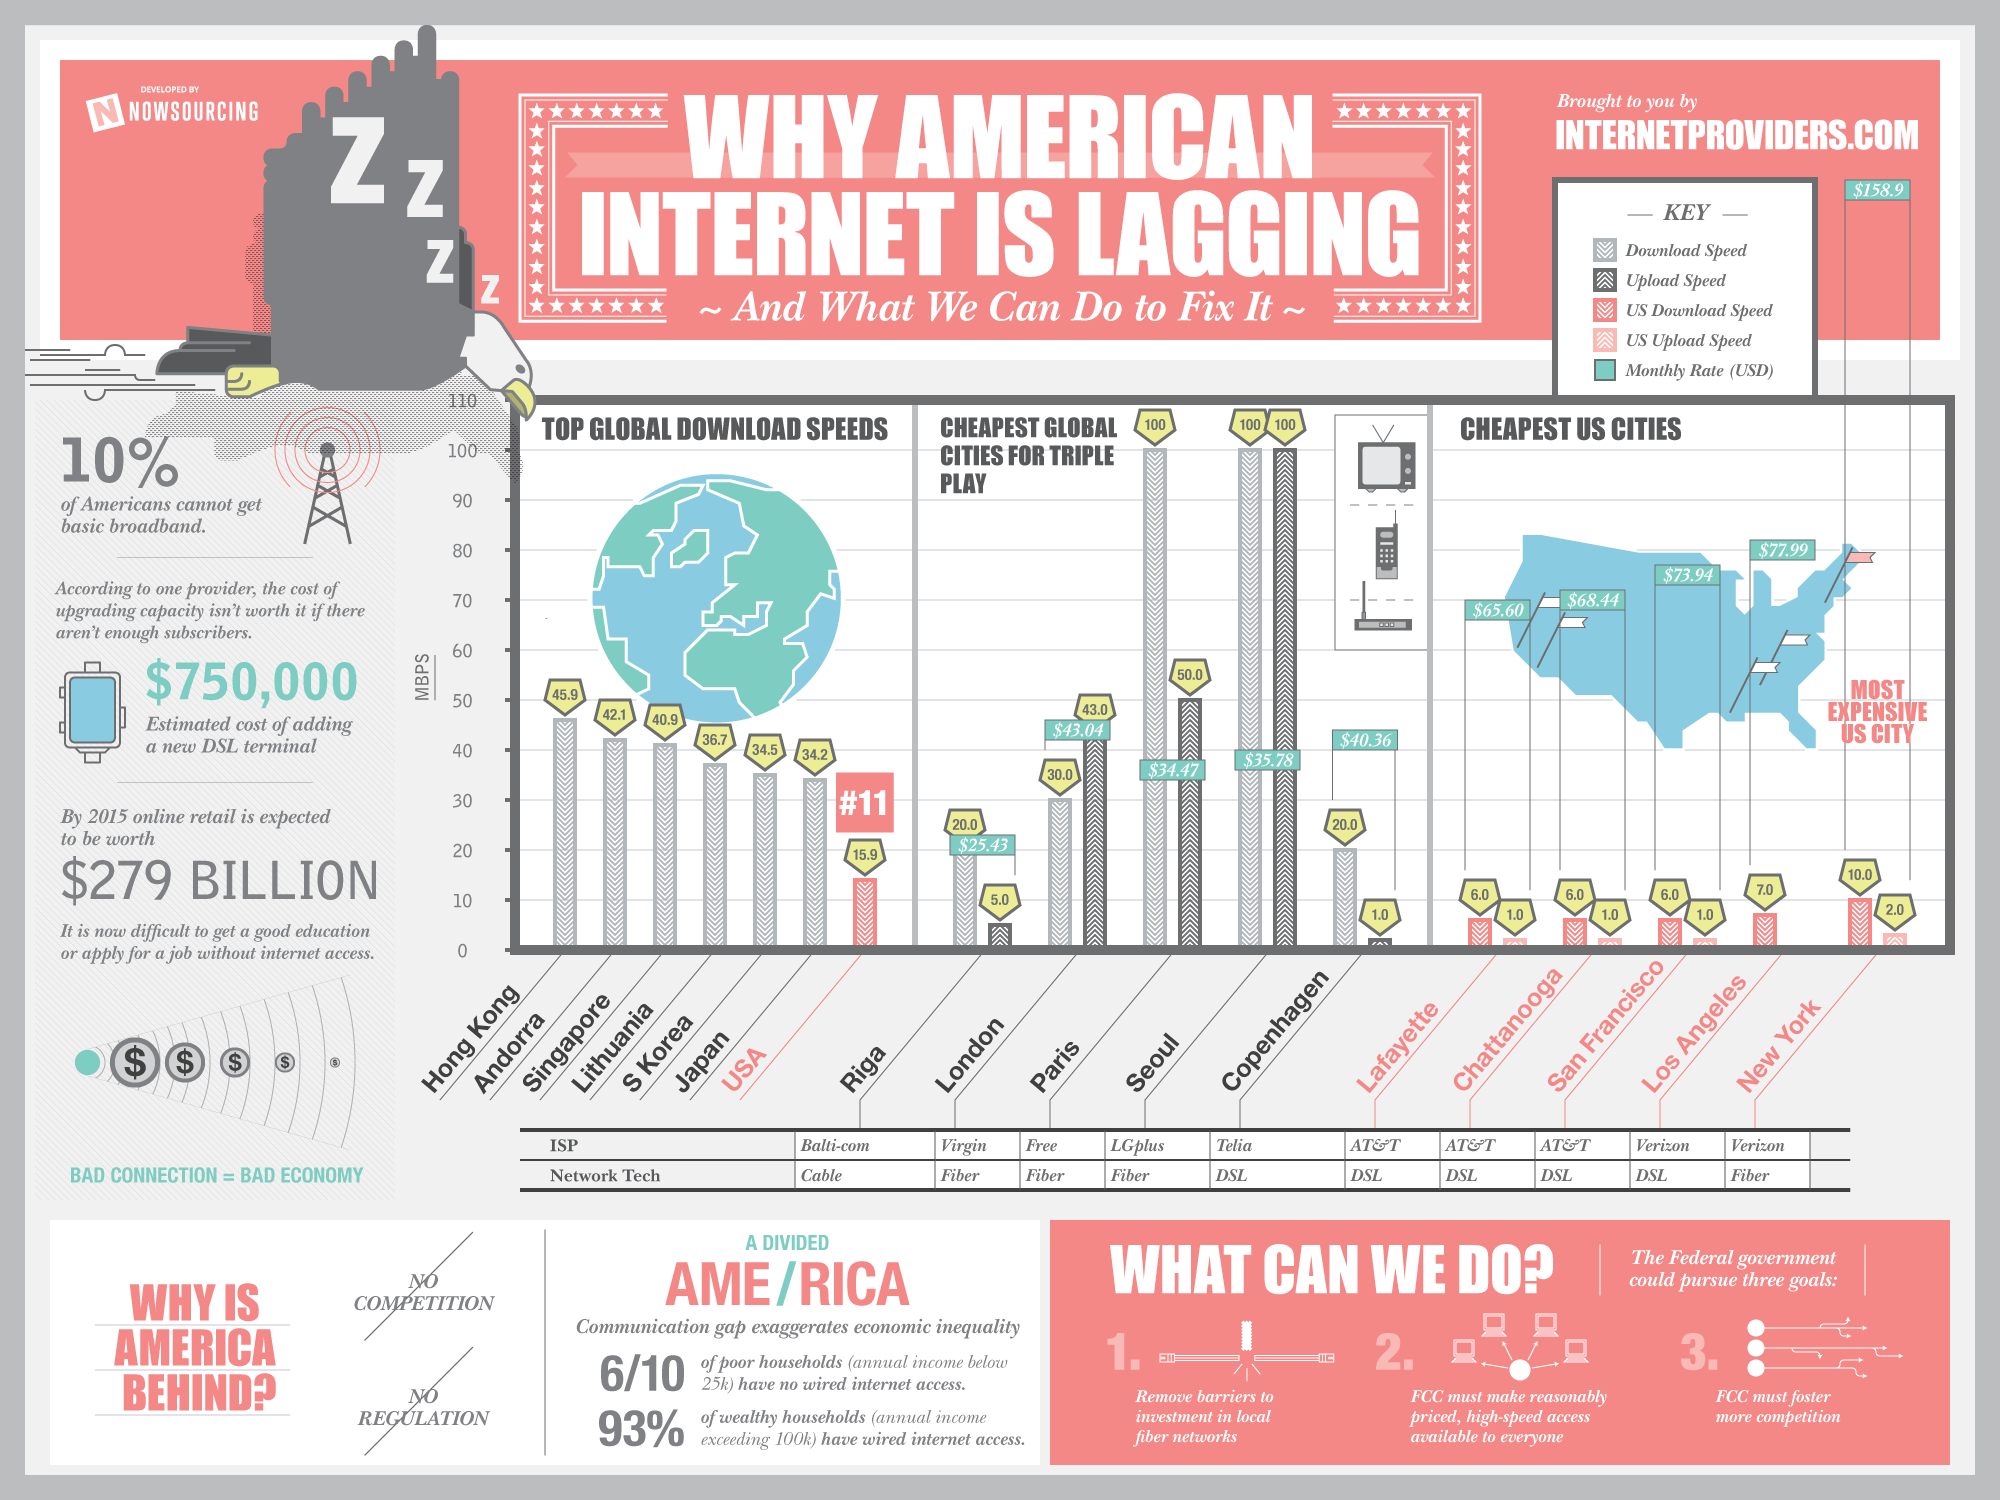 Why American Internet is Lagging